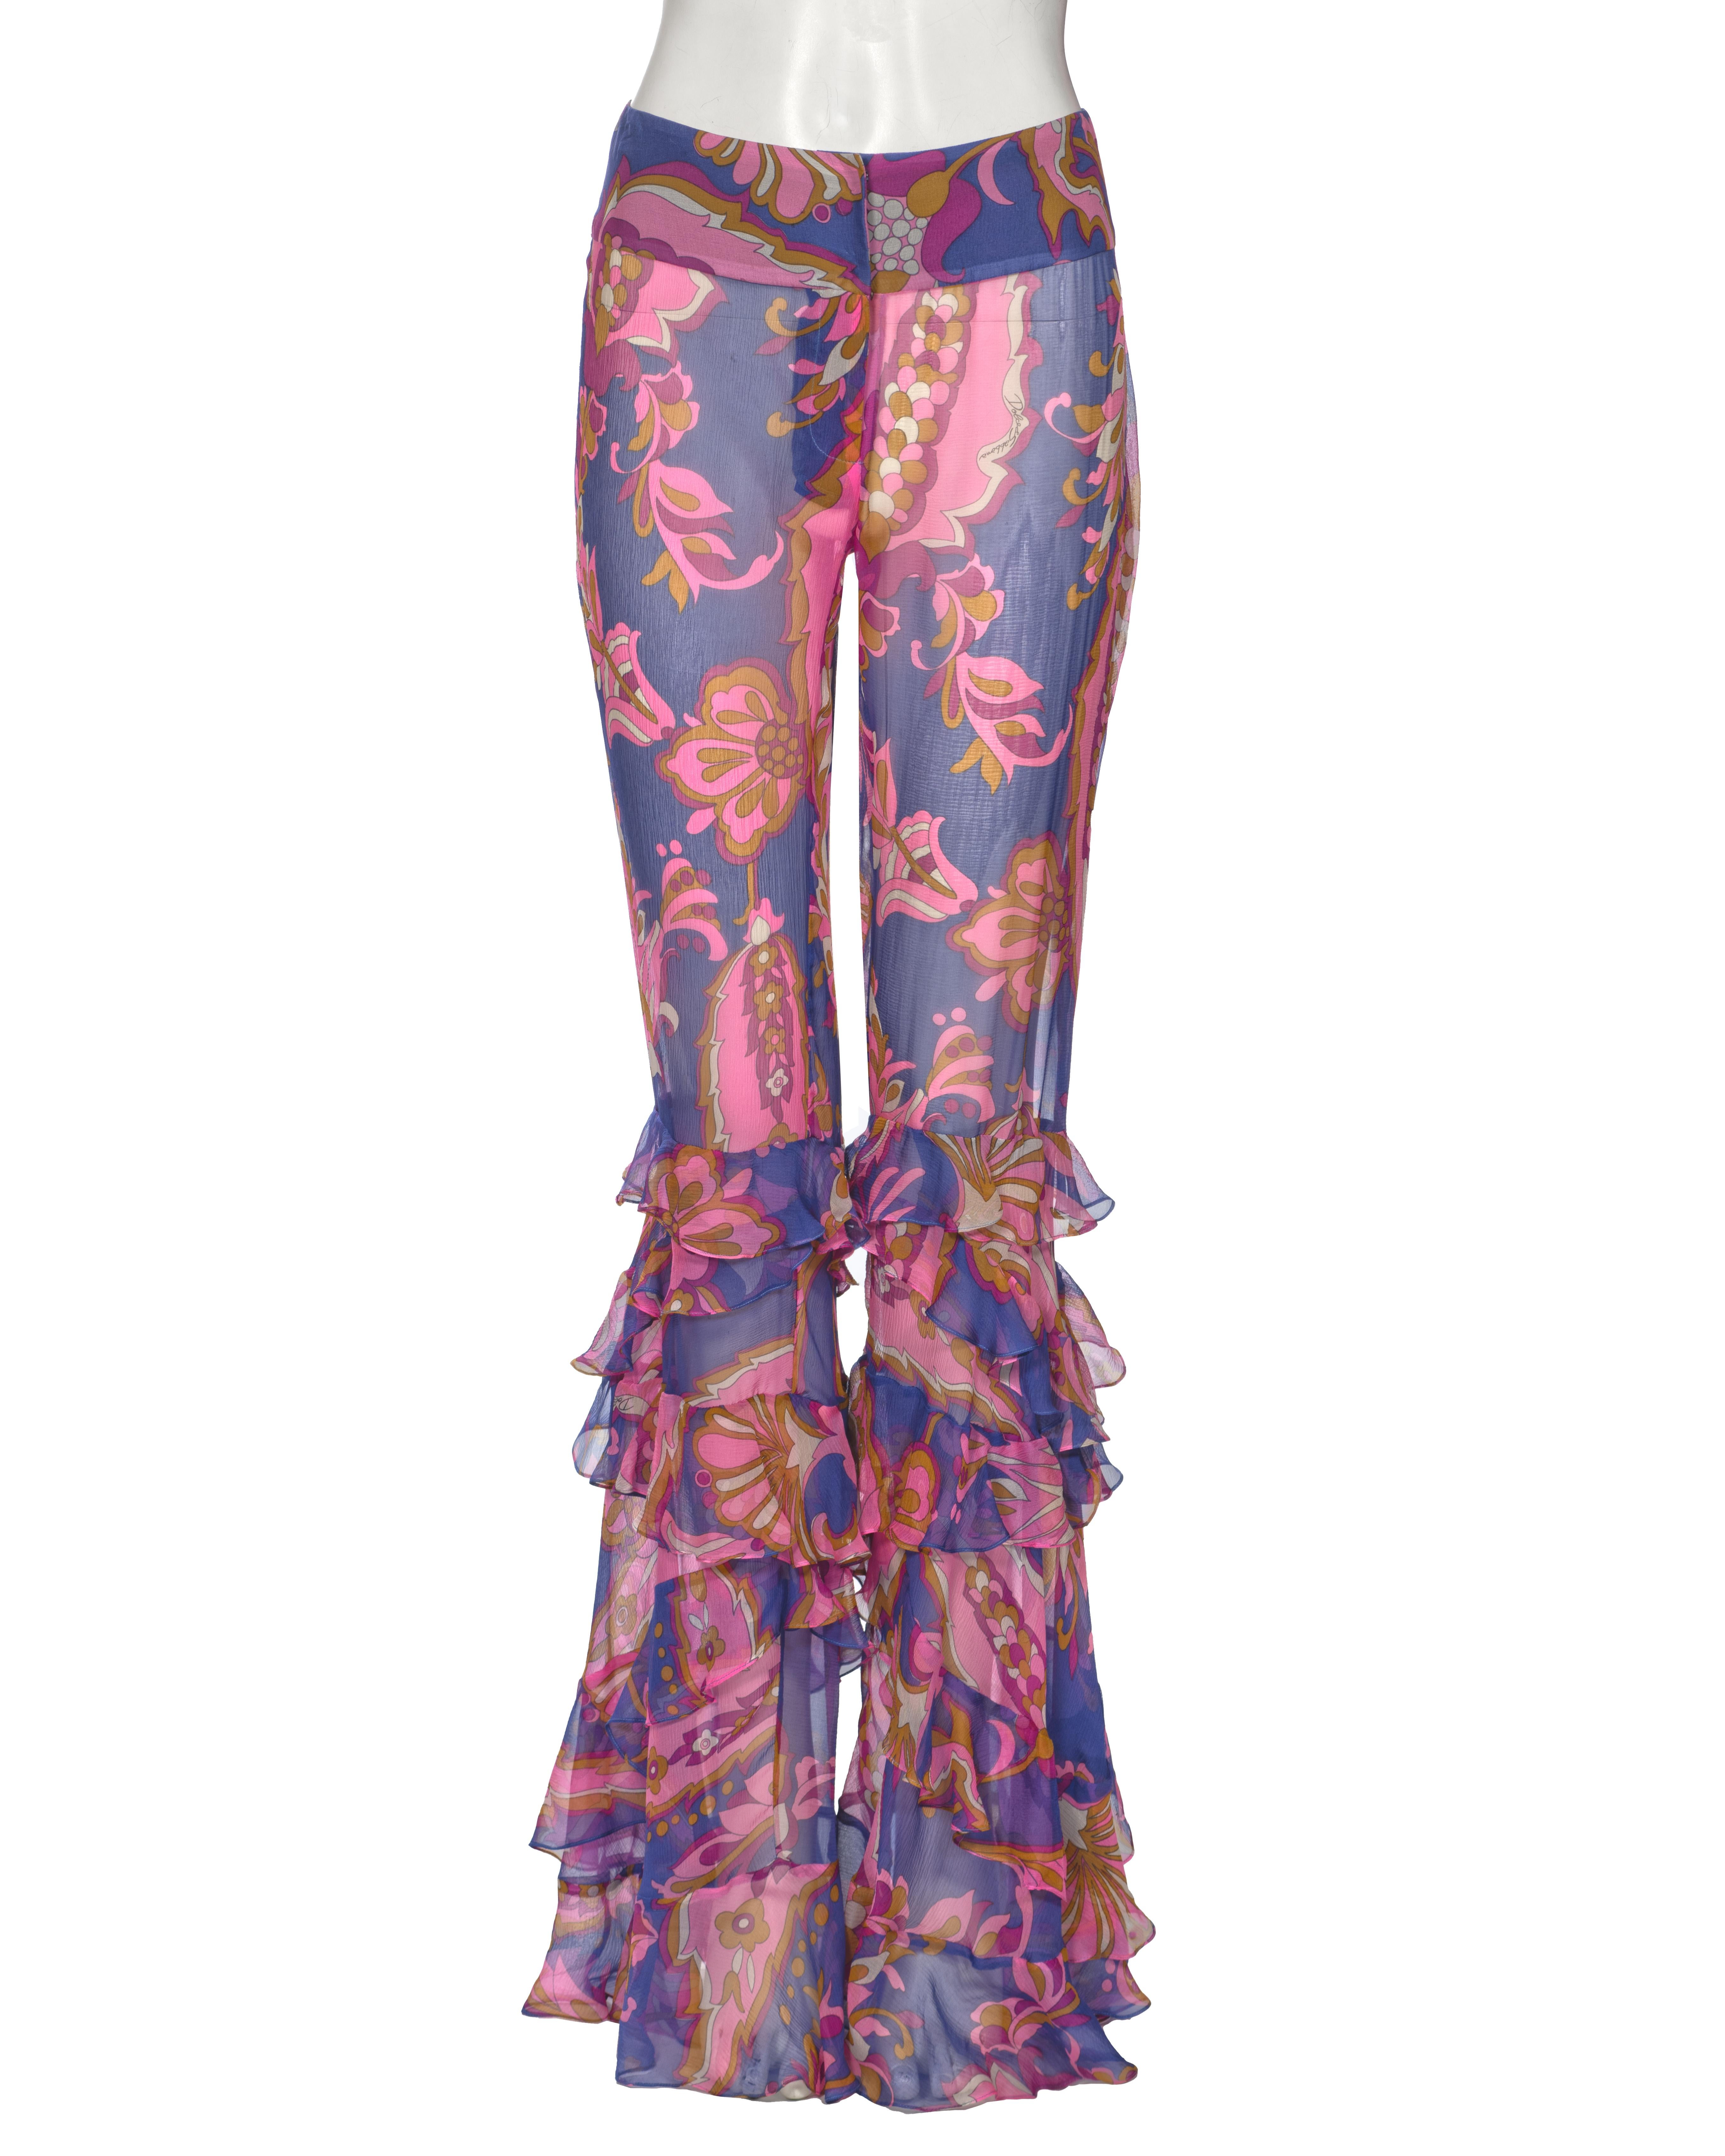 ▪ Dolce & Gabbana Silk Chiffon Ruffled Flared Pants
▪ Spring-Summer 2004
▪ Sold by One of a Kind Archive
▪ Semi-transparent silk chiffon pants with floral and paisley-inspired print
▪ Layered, cascading ruffles that begin at the knee and extend to